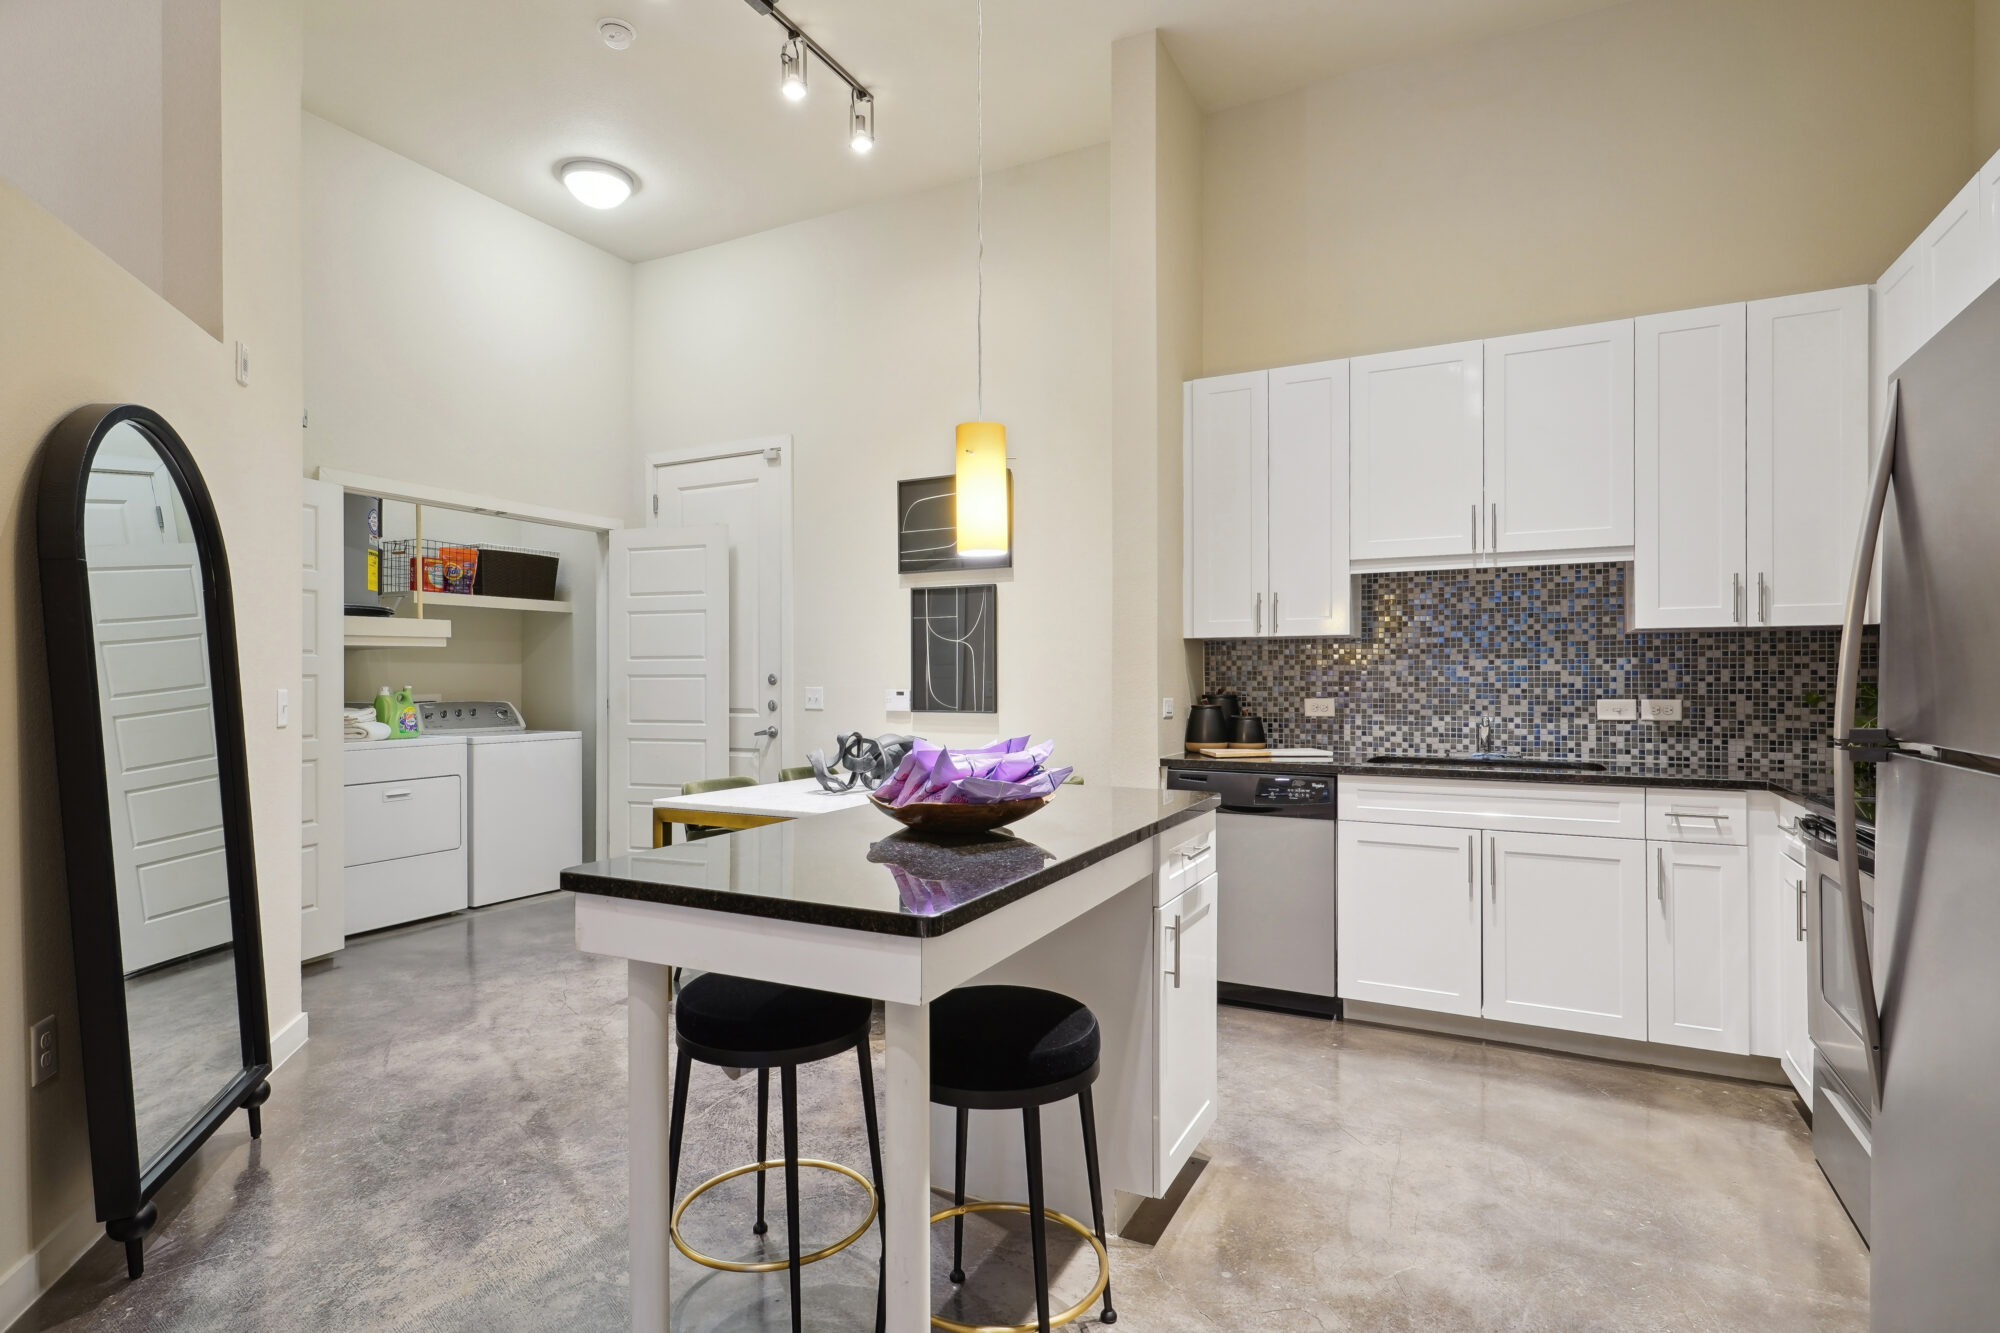 Kitchen with stainless steel appliances, granite counters, and tile backsplash